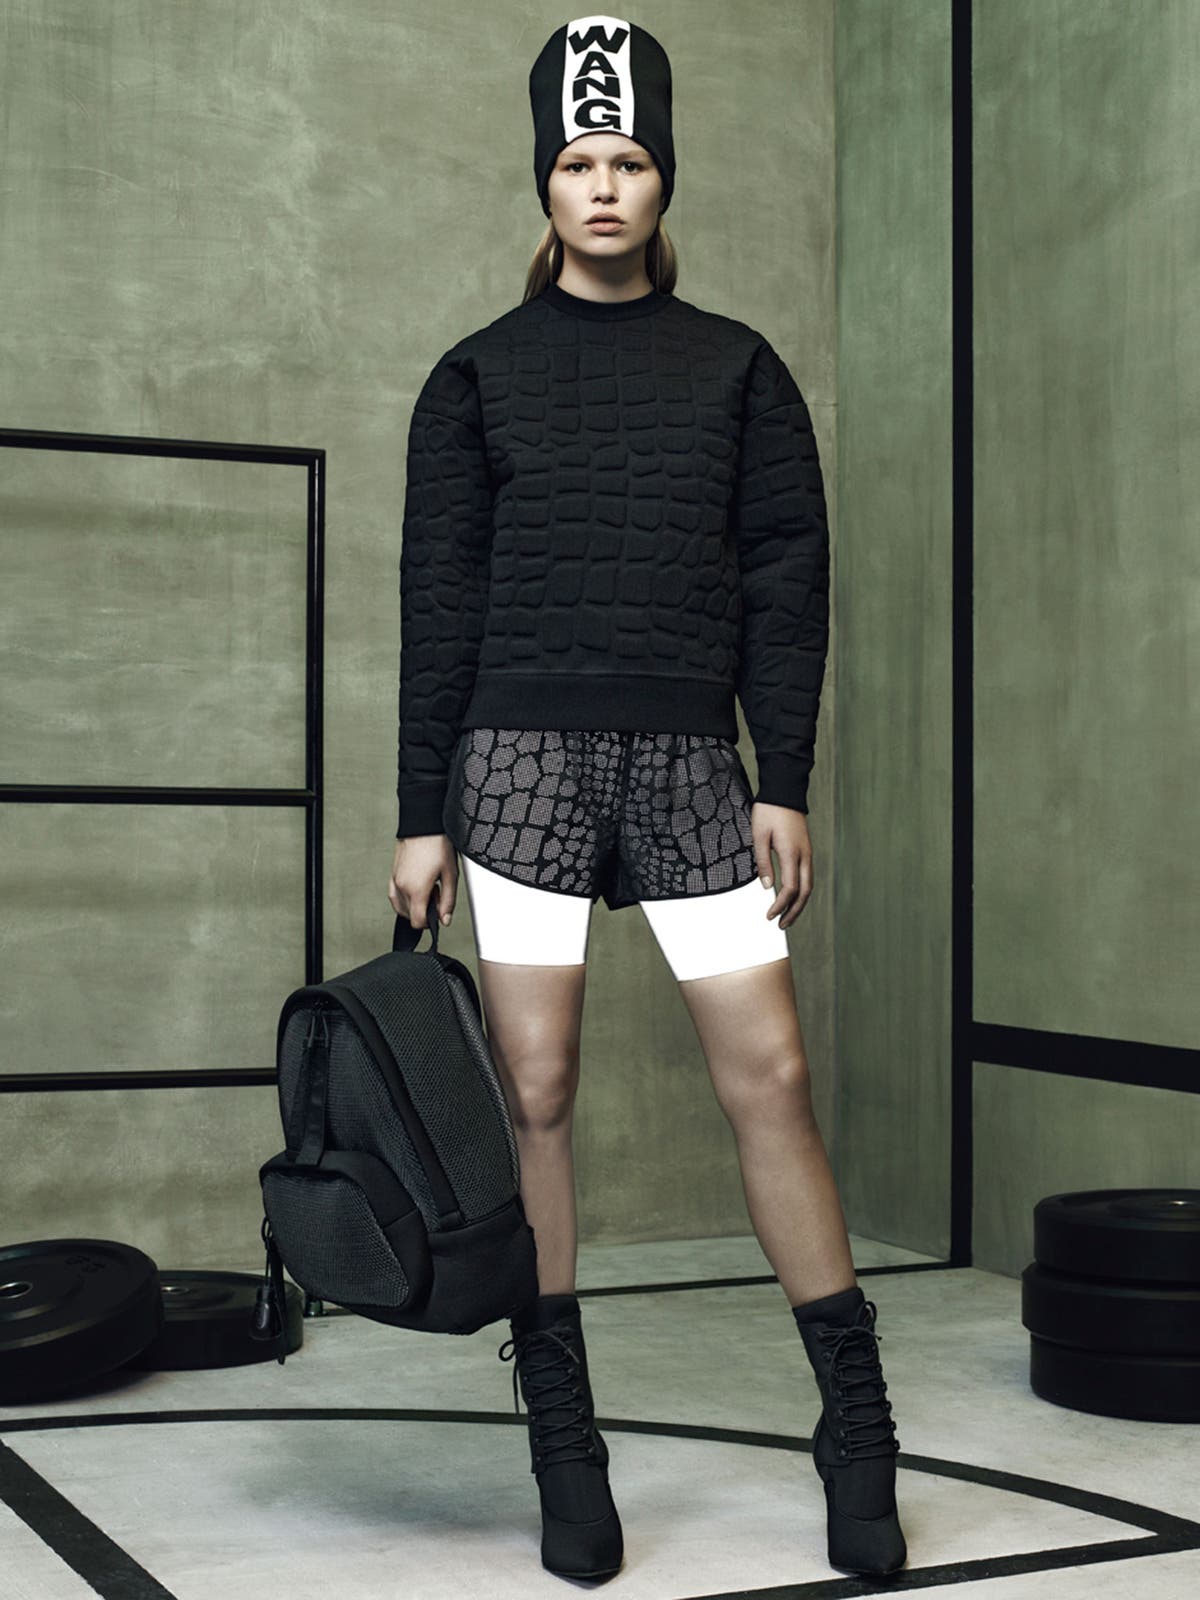 Alexander Wang For H M Collection Revealed In Full The Independent The Independent